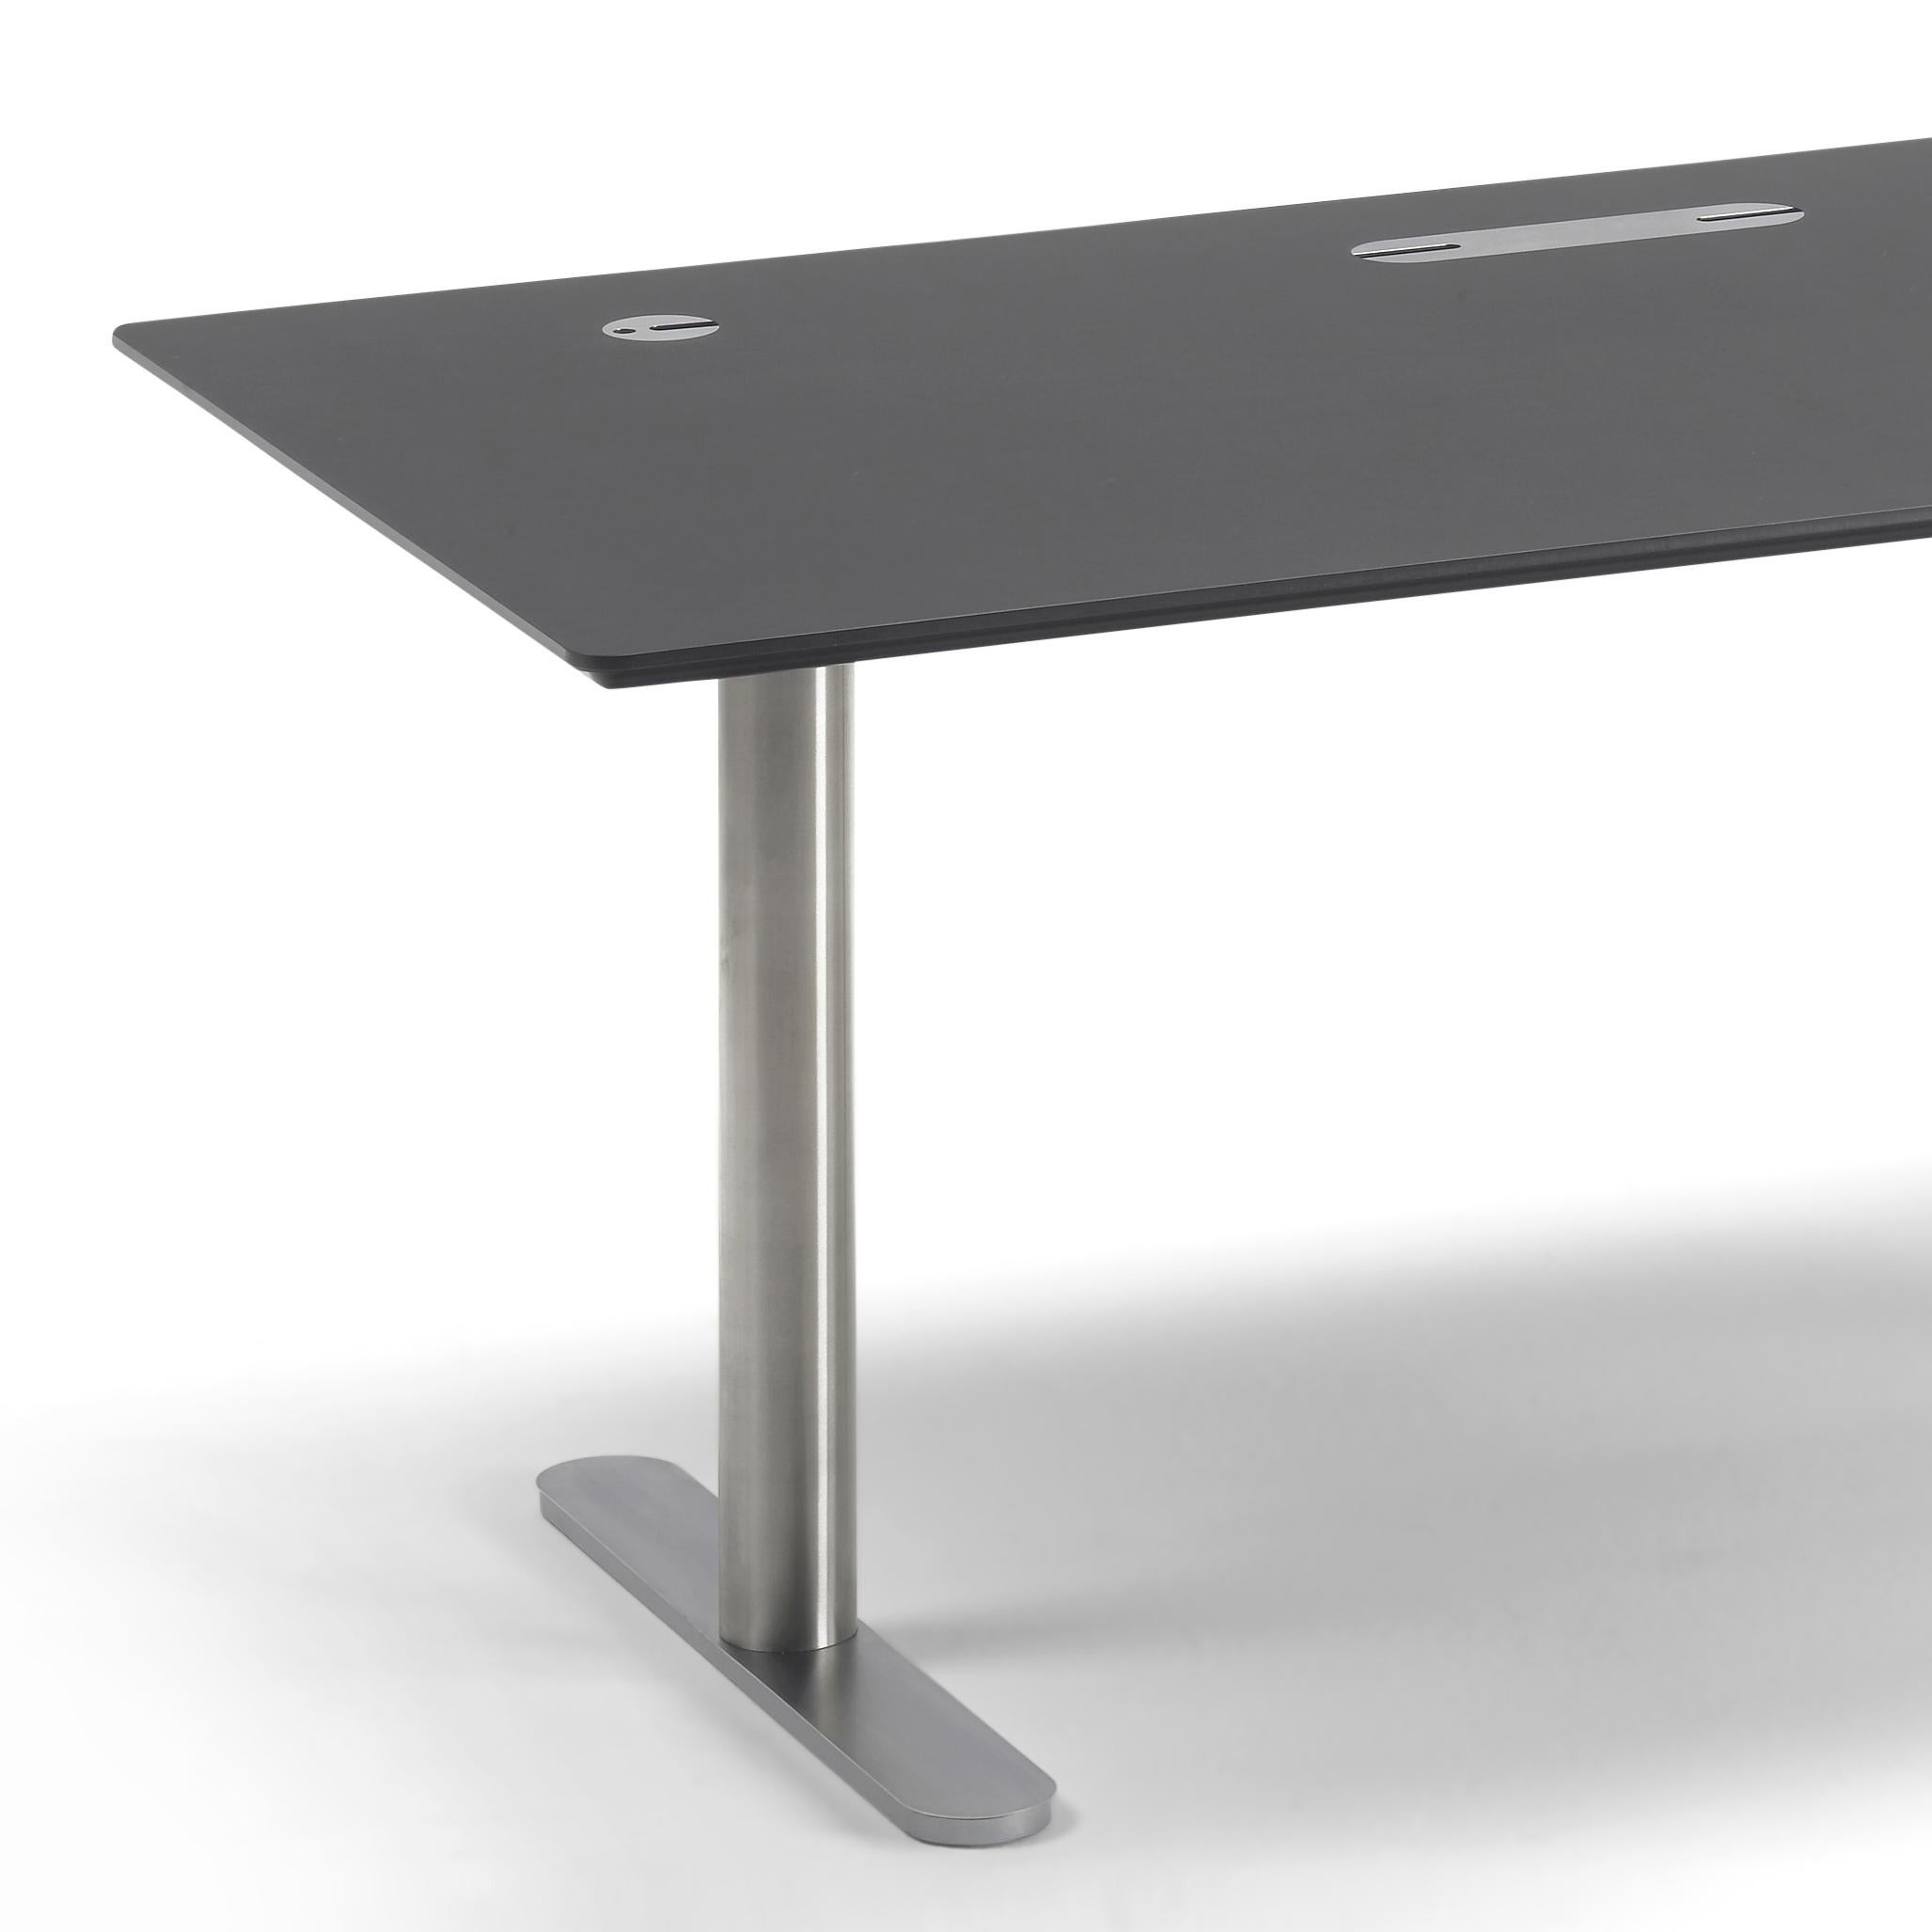 The Ezone desk was designed in 2004 by Henrik Tengler. Over the years the Ezone desk has proven to be a reliable and durable companion in the daily lives of thousands of hard working people. The Ezone desk has stood the test of time and has become